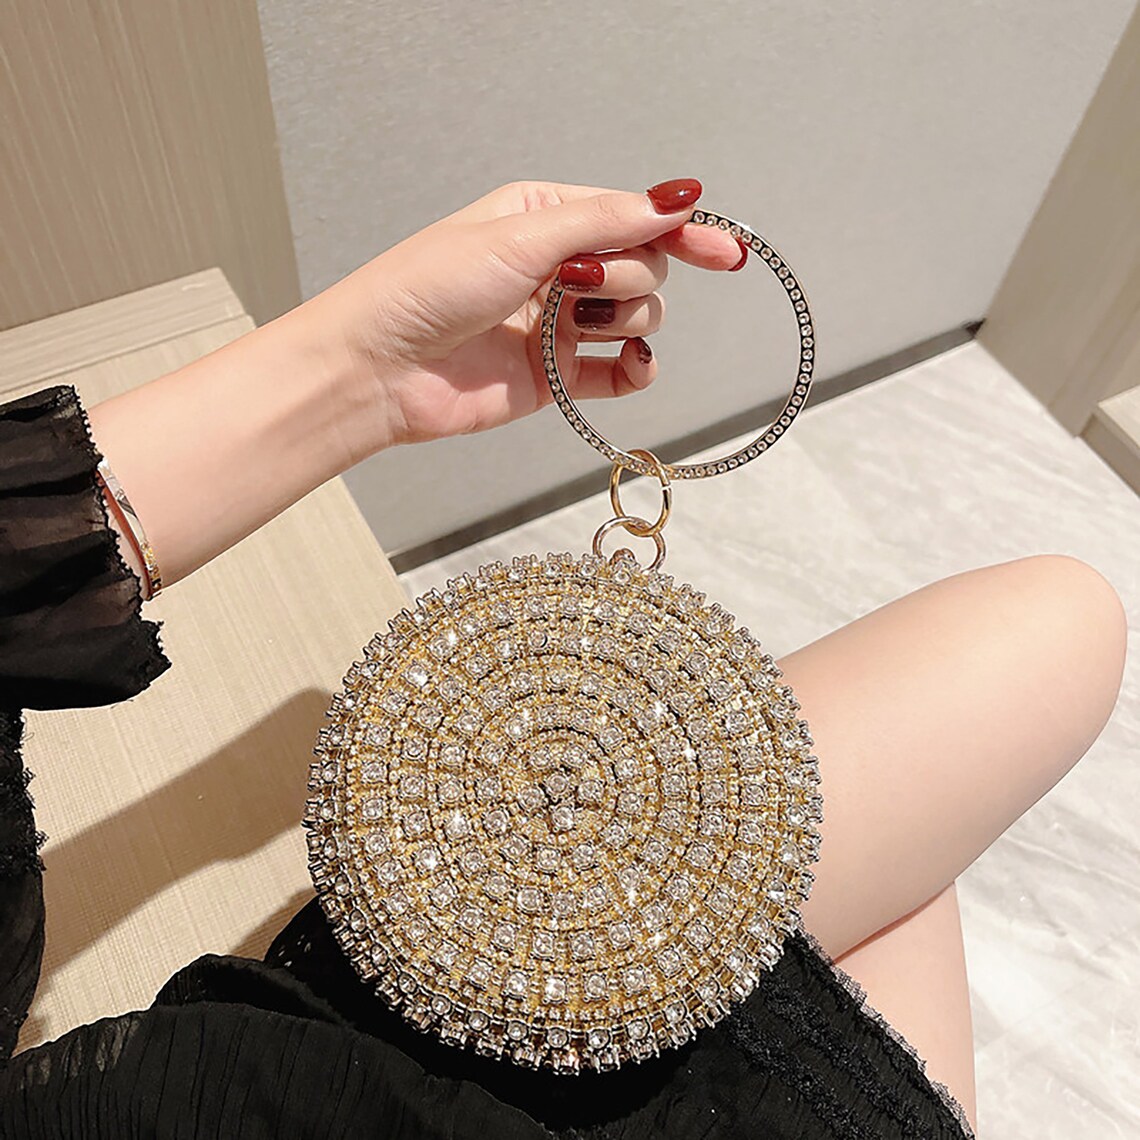 Sphere 3D Clutch with Shoulder Chain